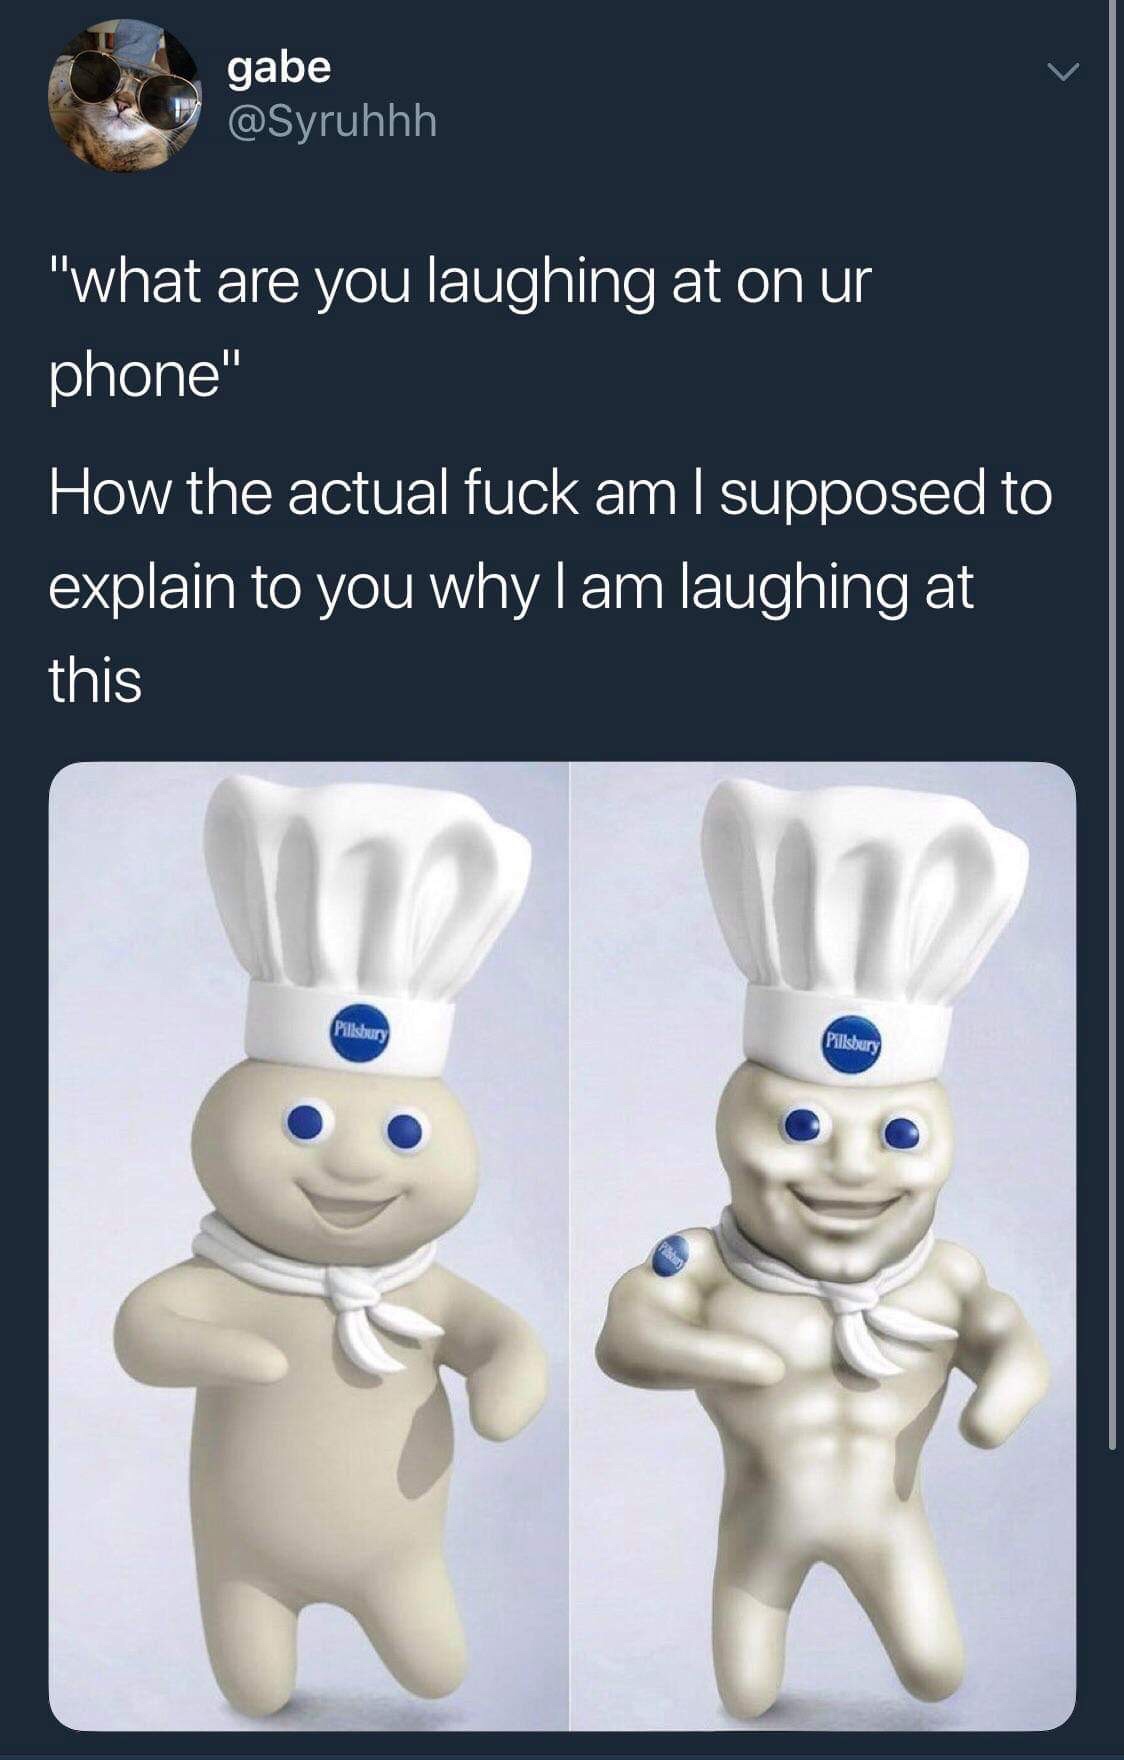 buff pillsbury doughboy - gabe "what are you laughing at on ur phone" How the actual fuck am I supposed to explain to you whylam laughing at this Ilsbury Pillsbury